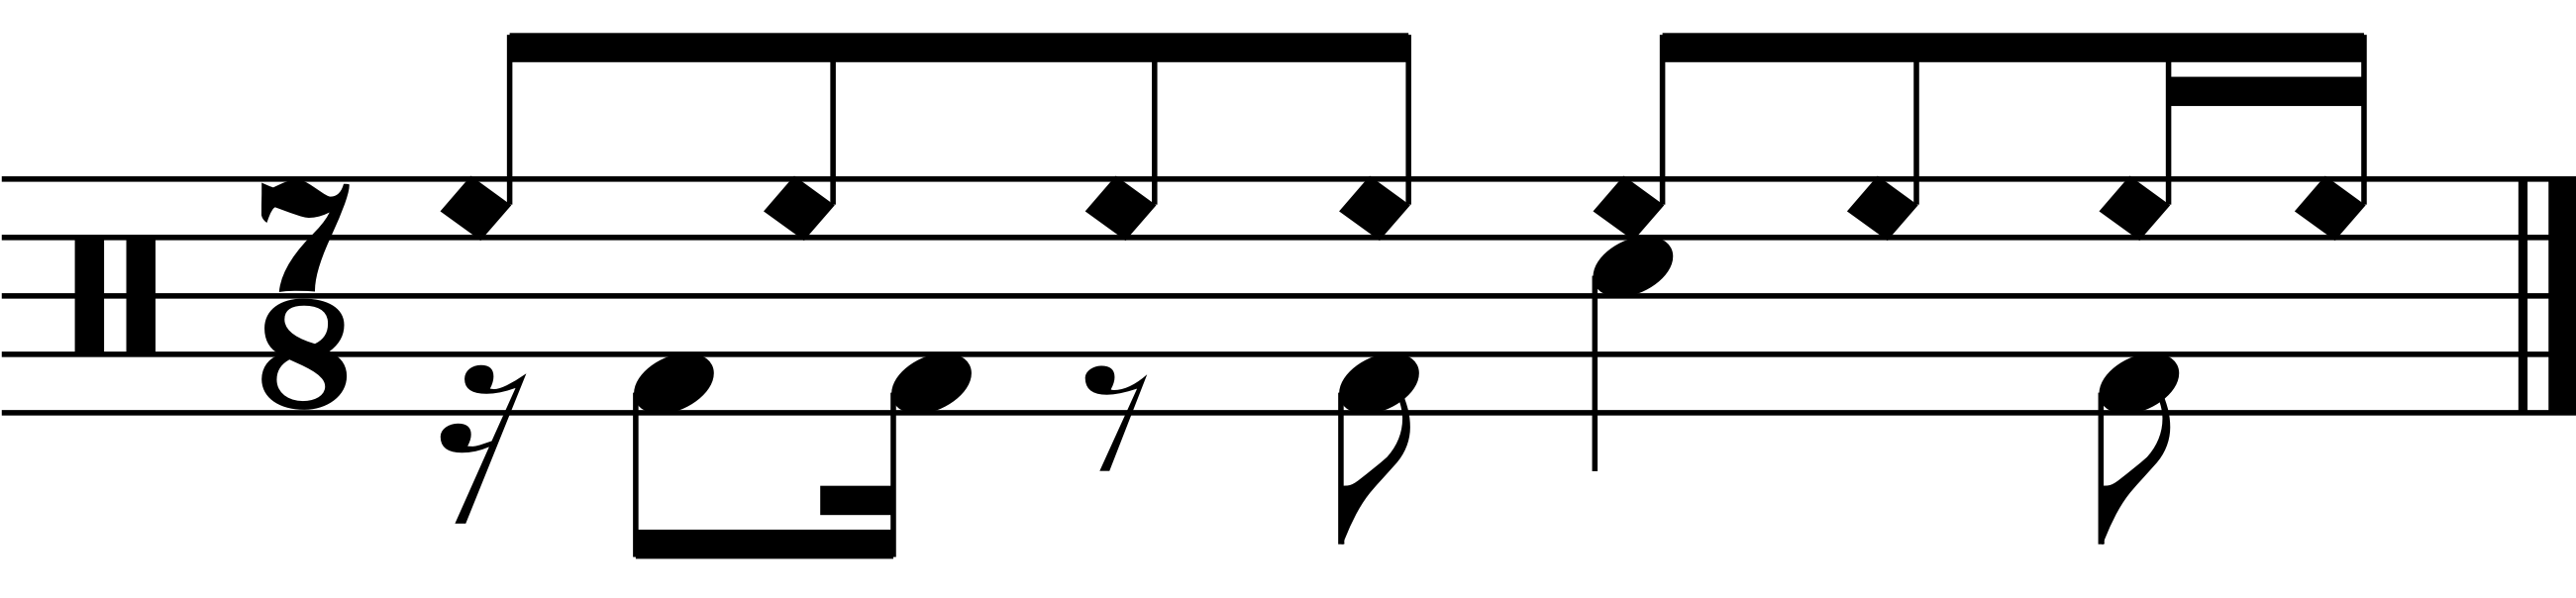 16th note right hands